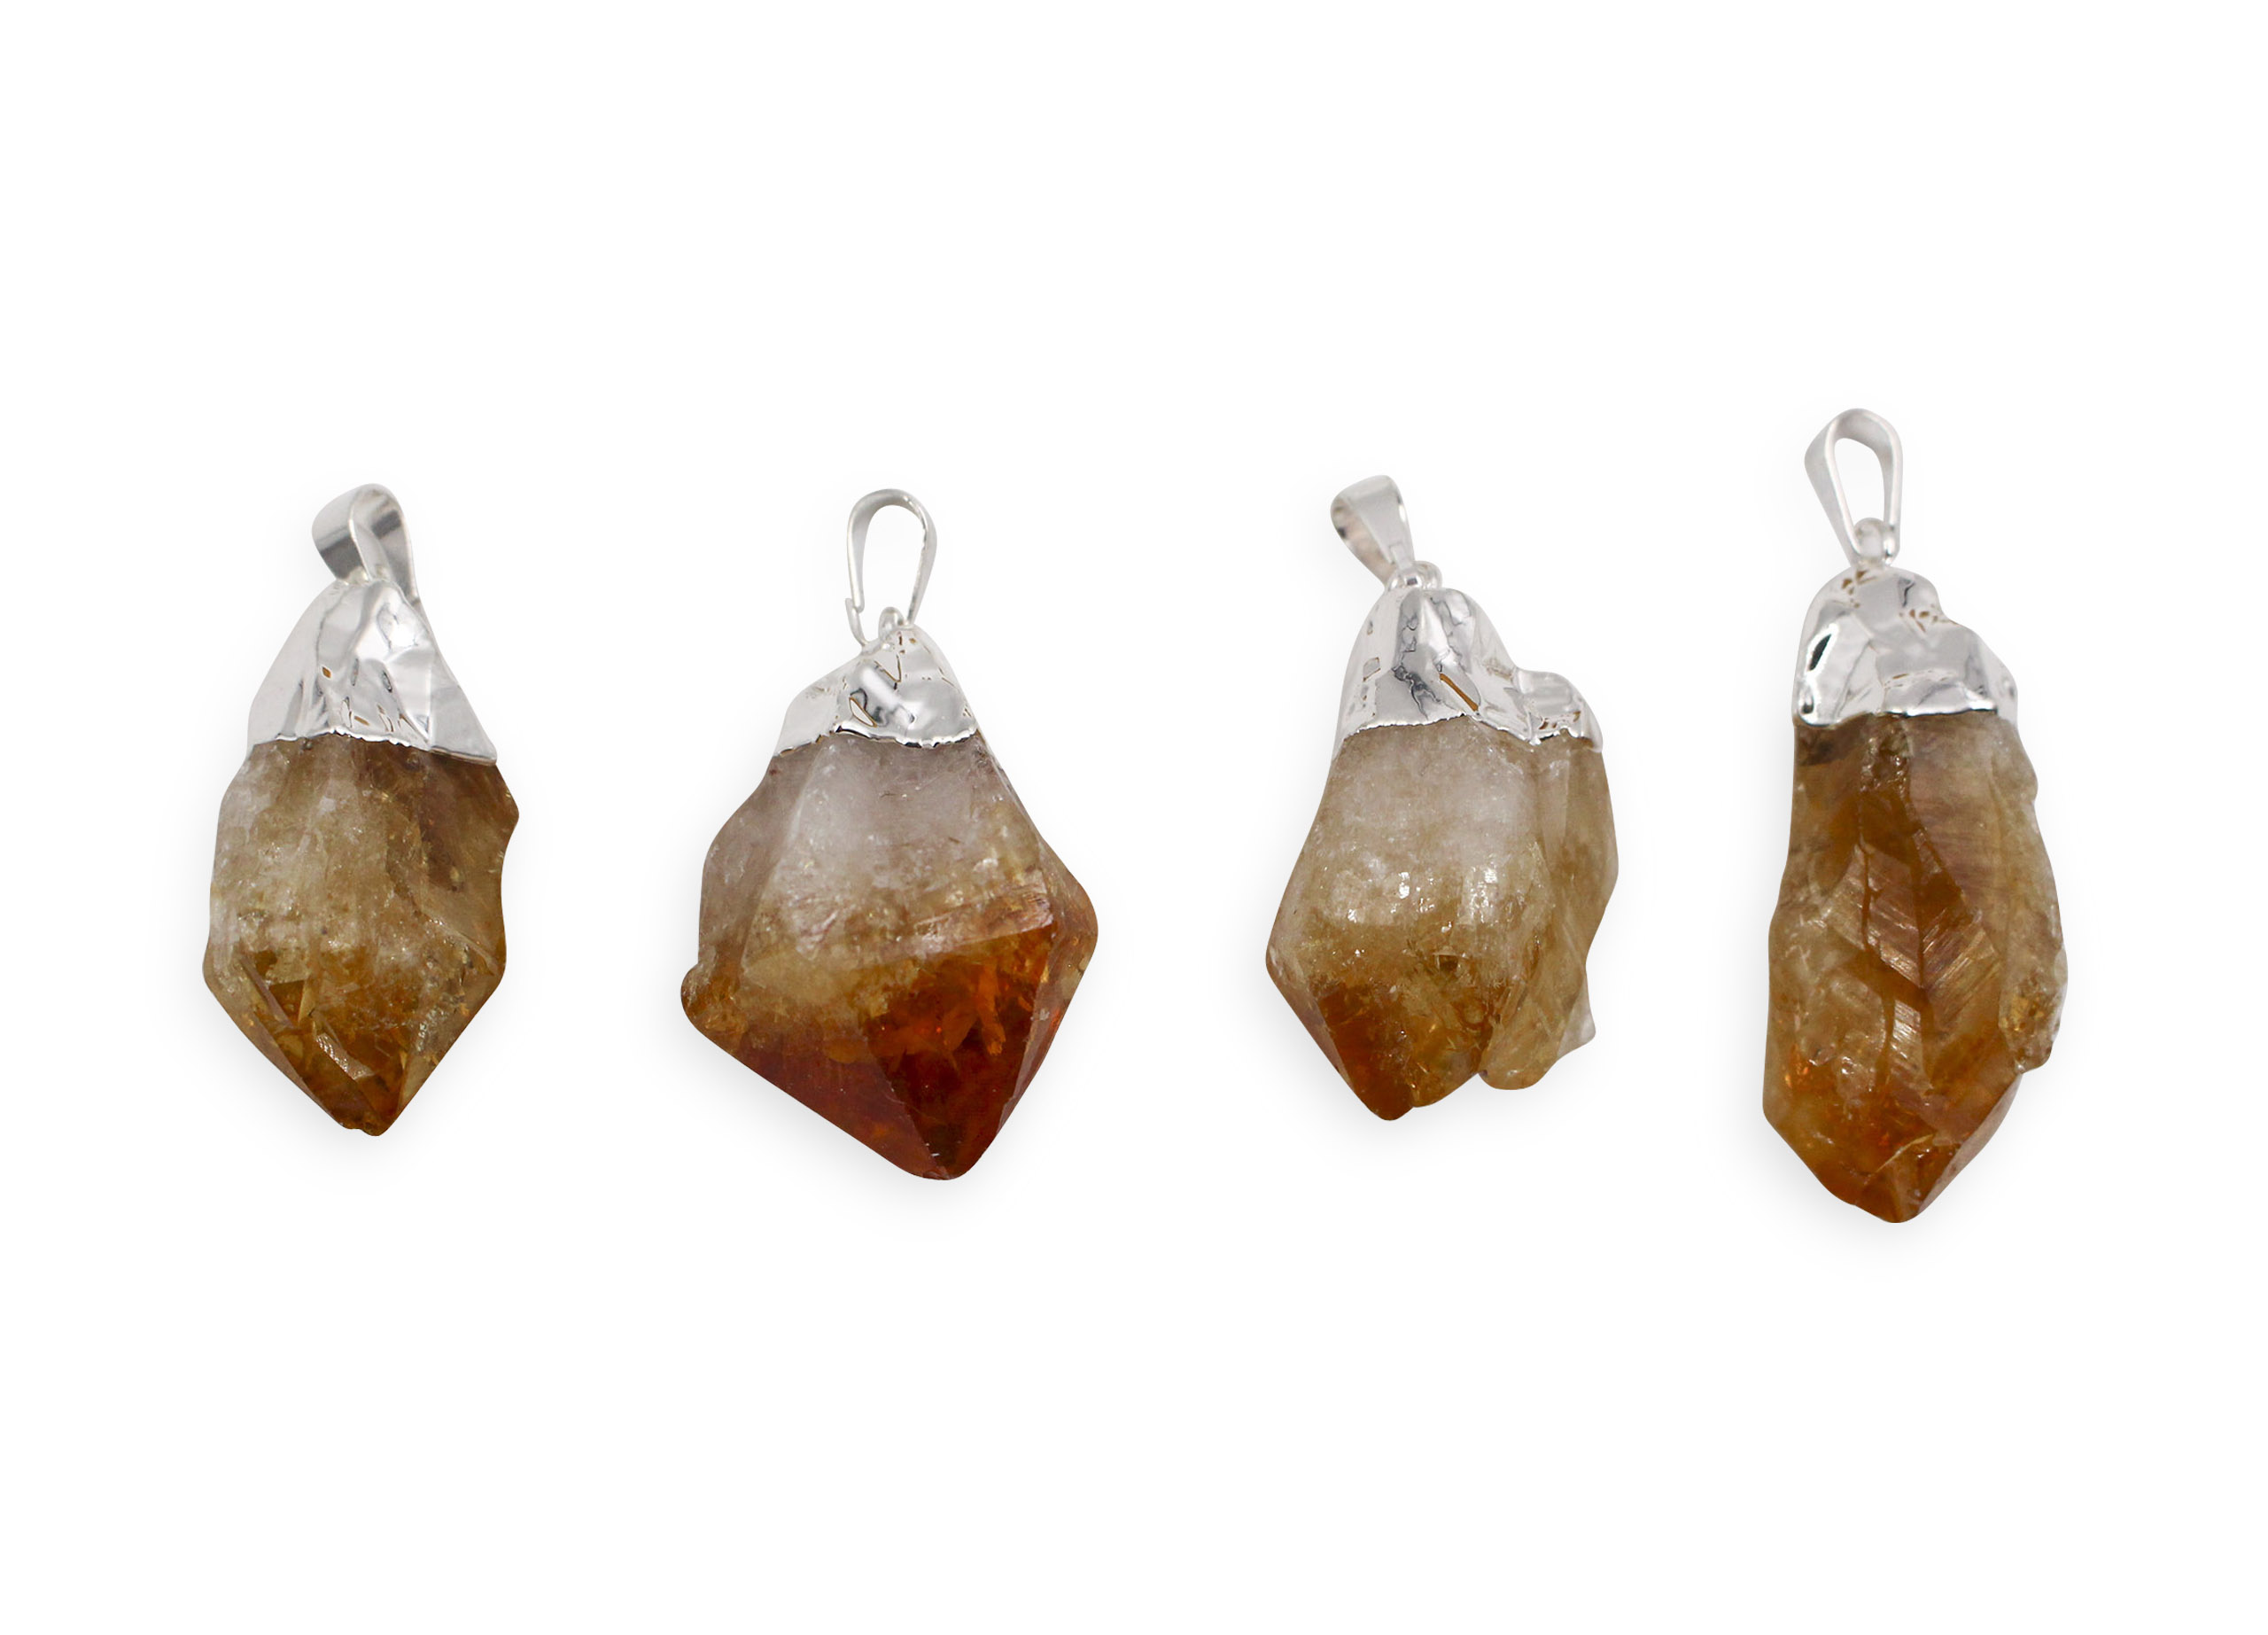 Citrine Polished Point Pendant Silver Colour - Crystal Dreams